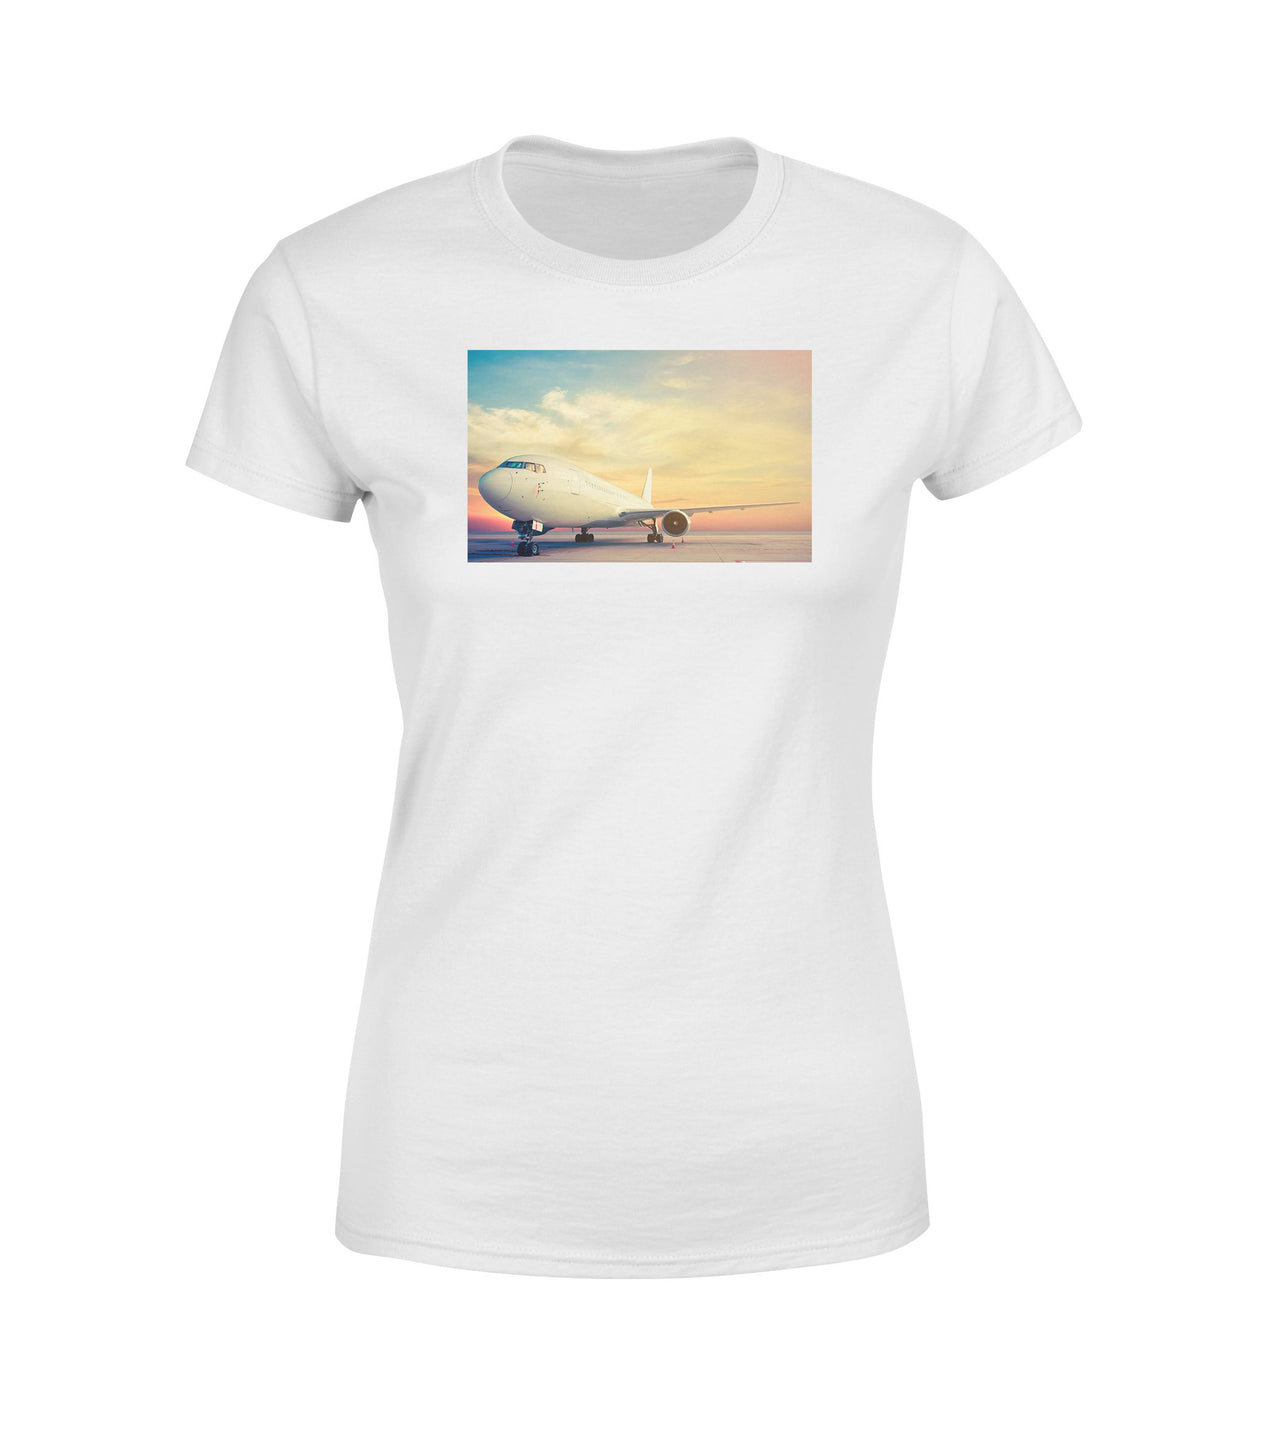 Parked Aircraft During Sunset Designed Women T-Shirts